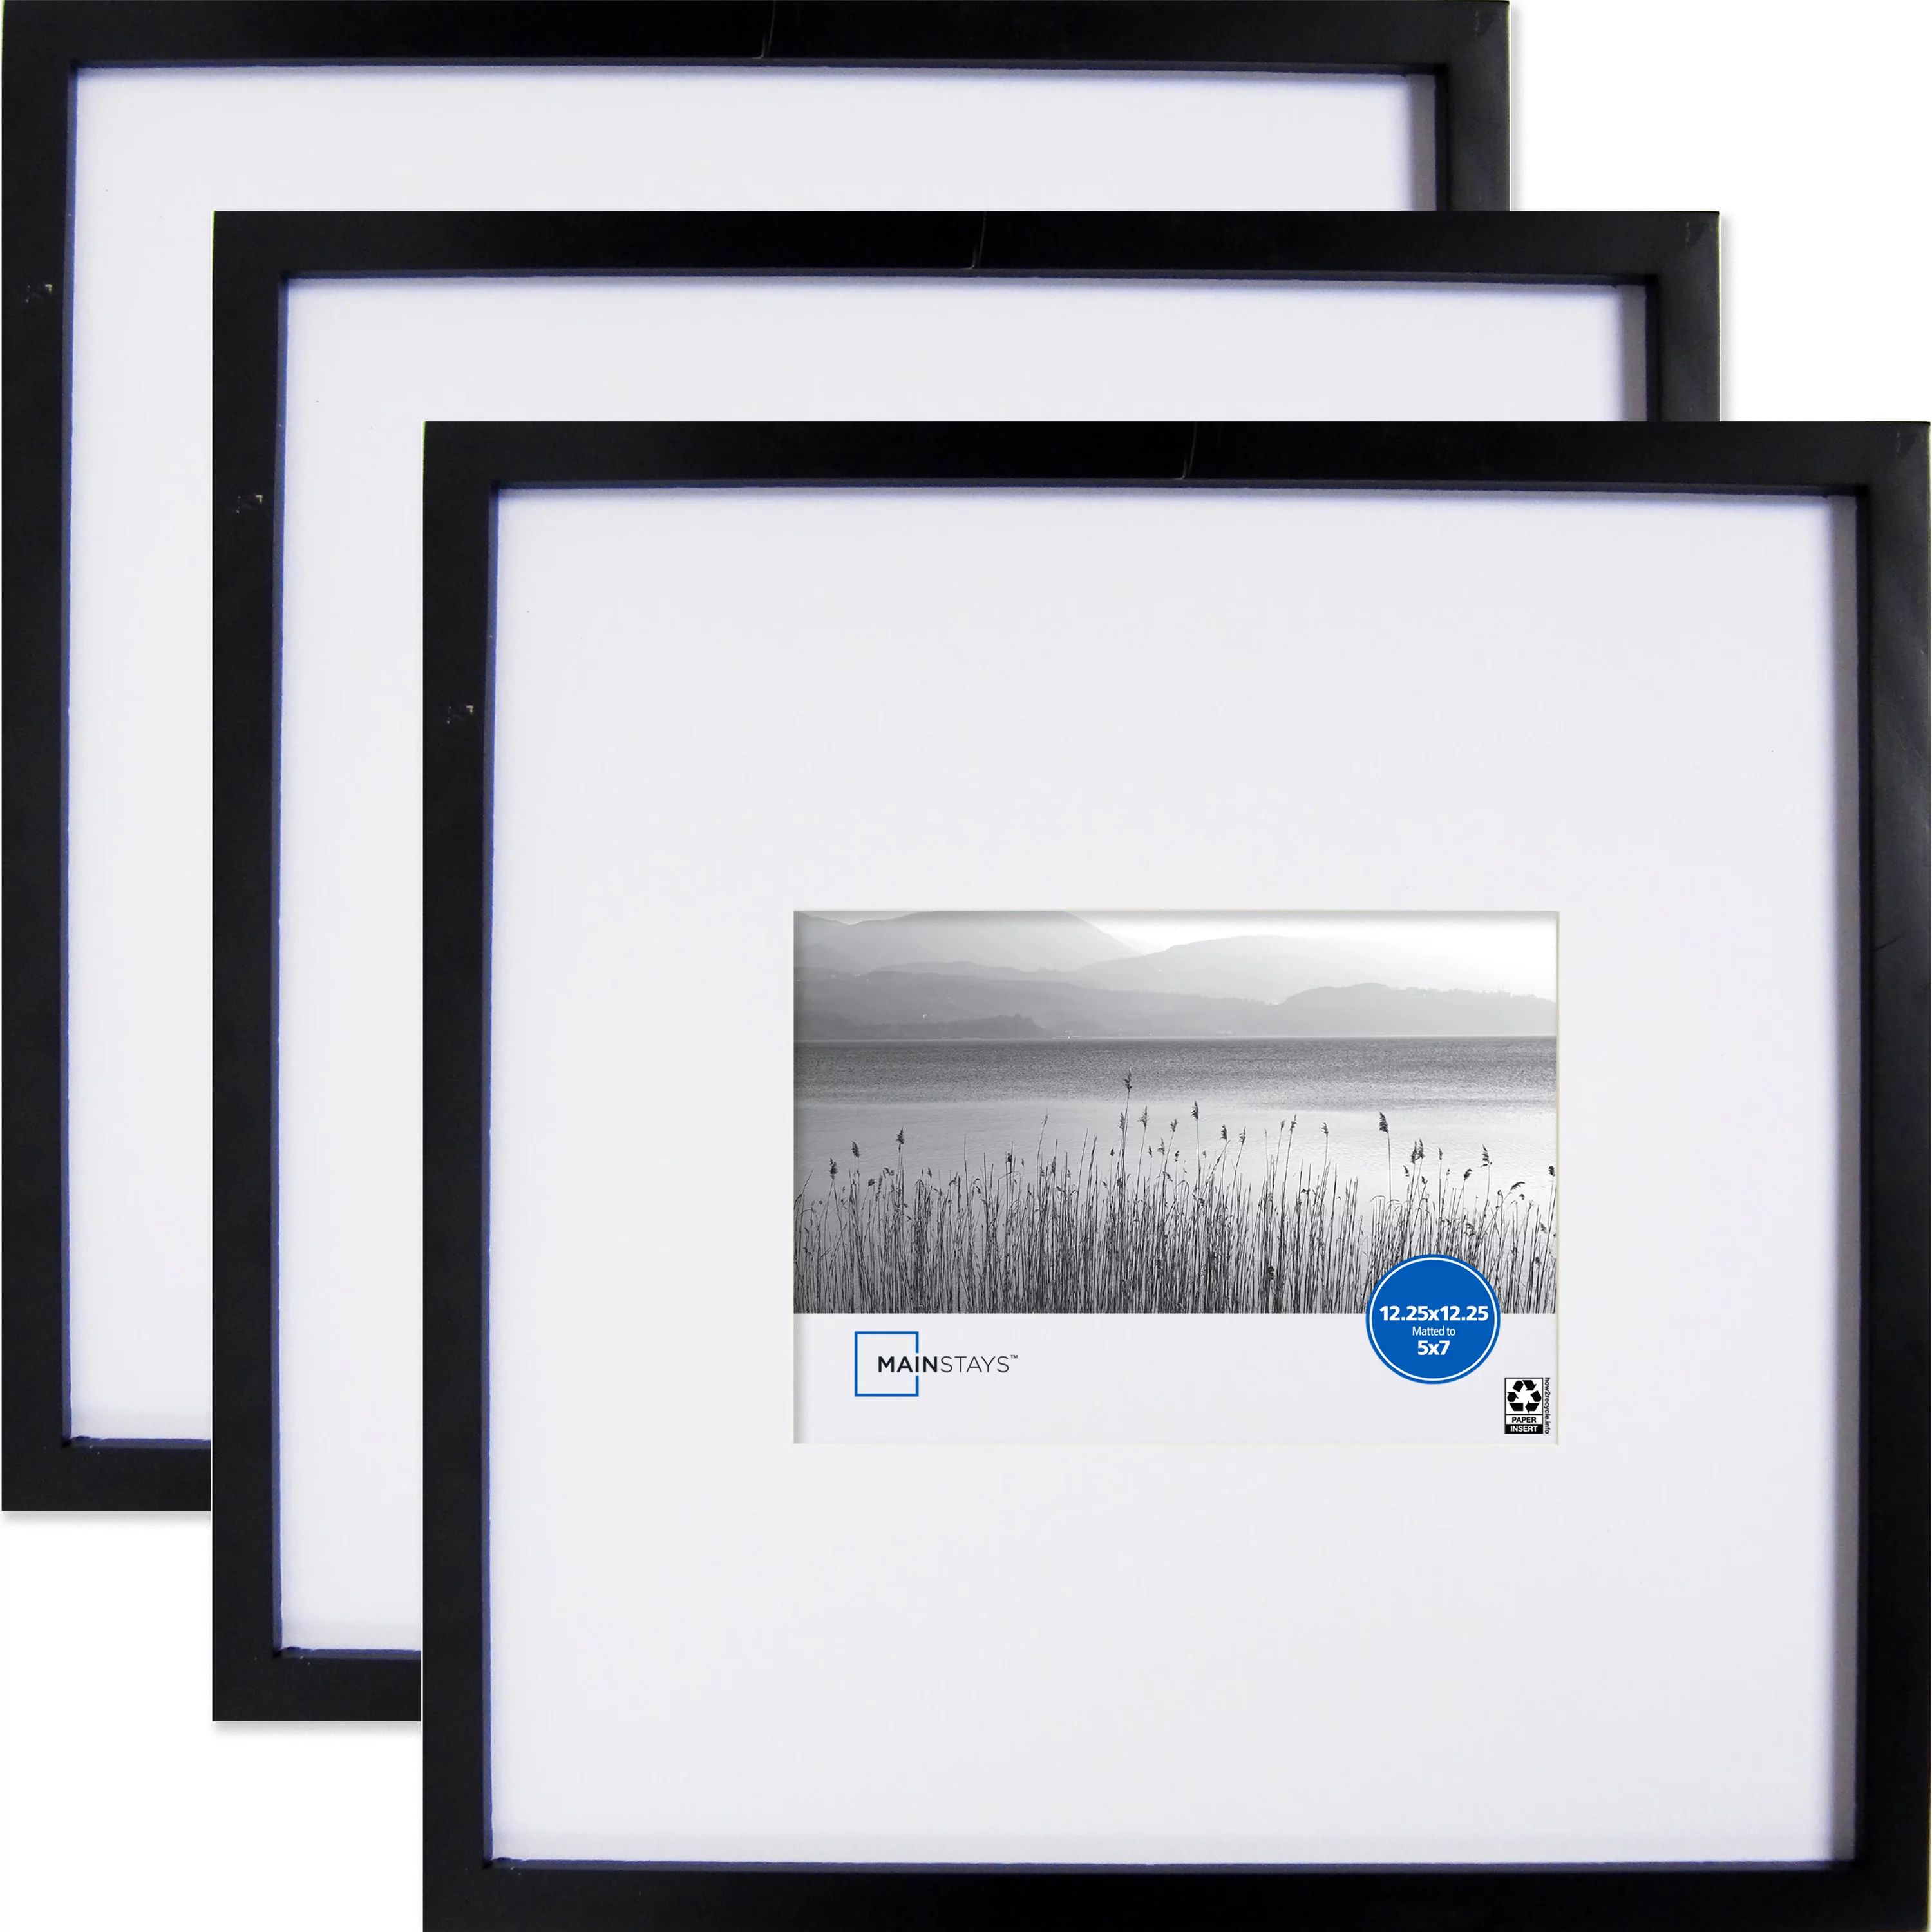 12.25x12.25 Matted to 5x7 | Walmart (US)